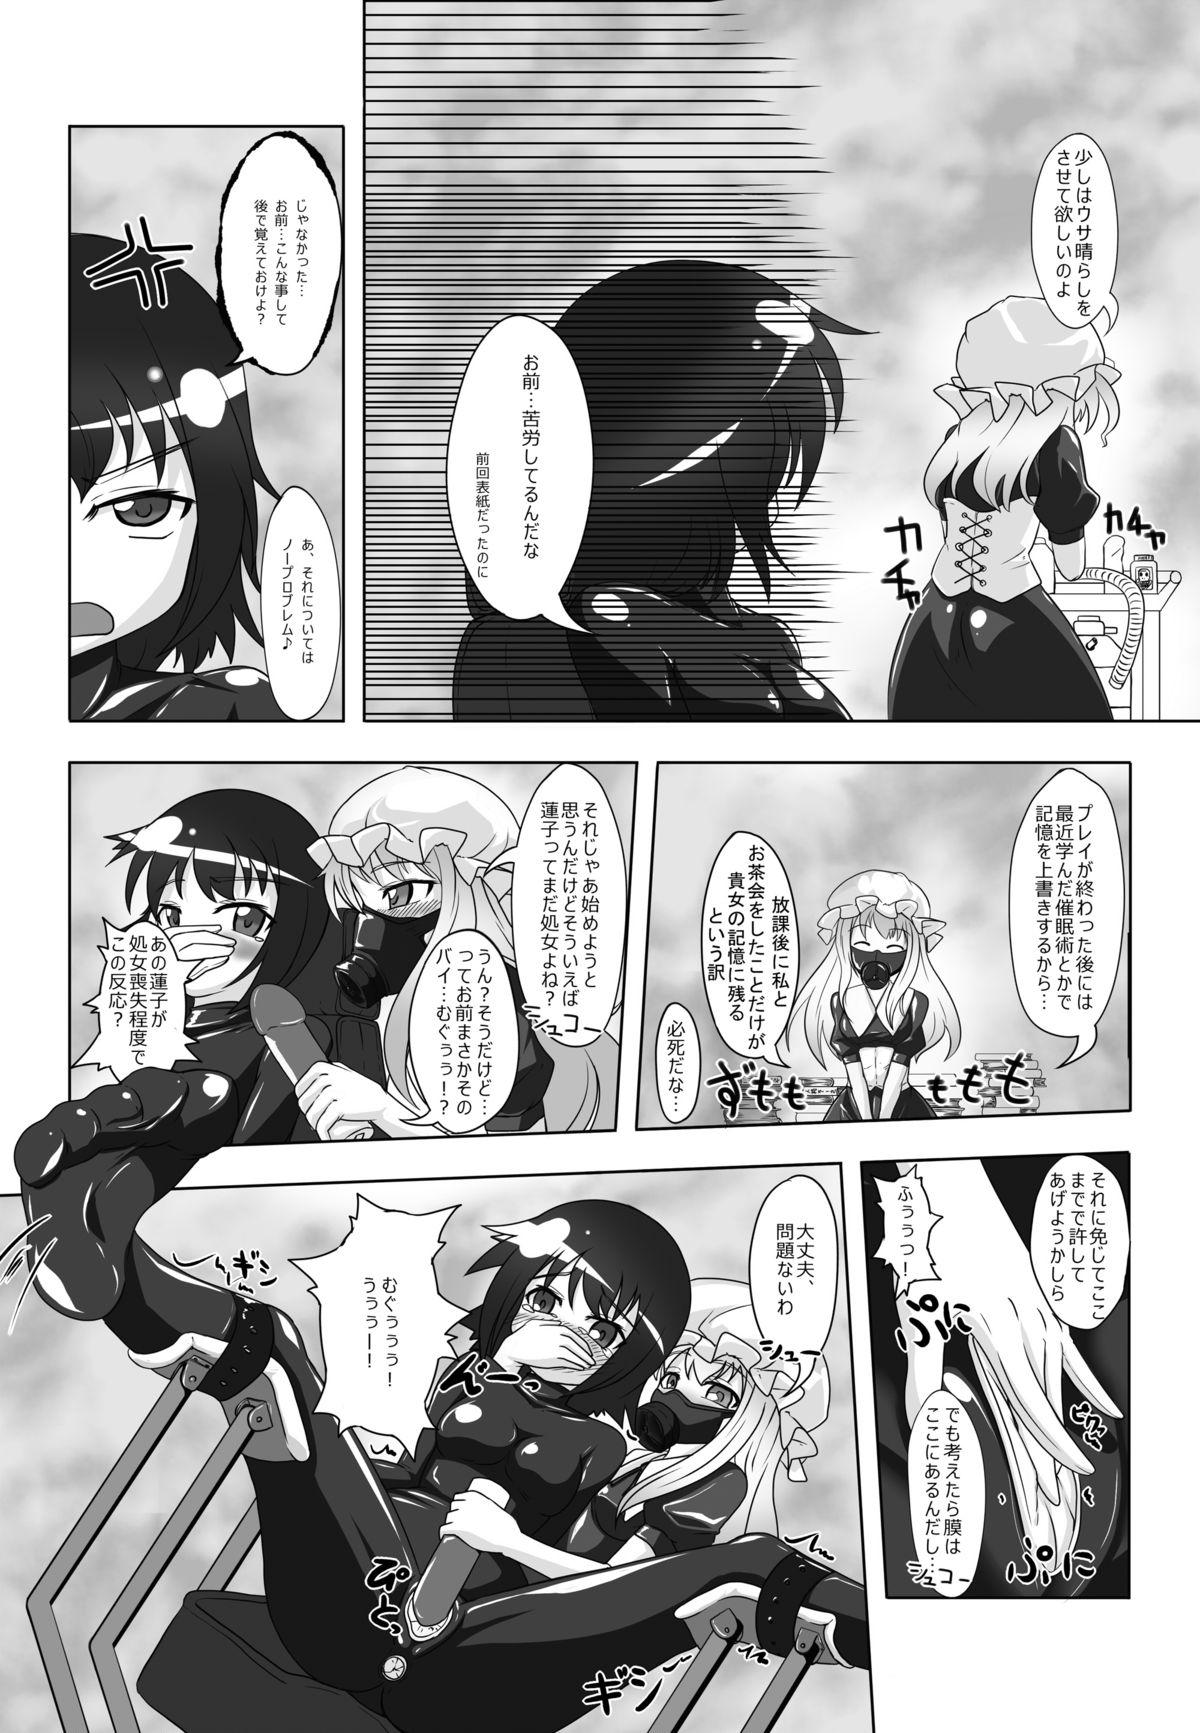 Ass Fucked 2nd Skin Vol. 1 - Touhou project Gaygroup - Page 9